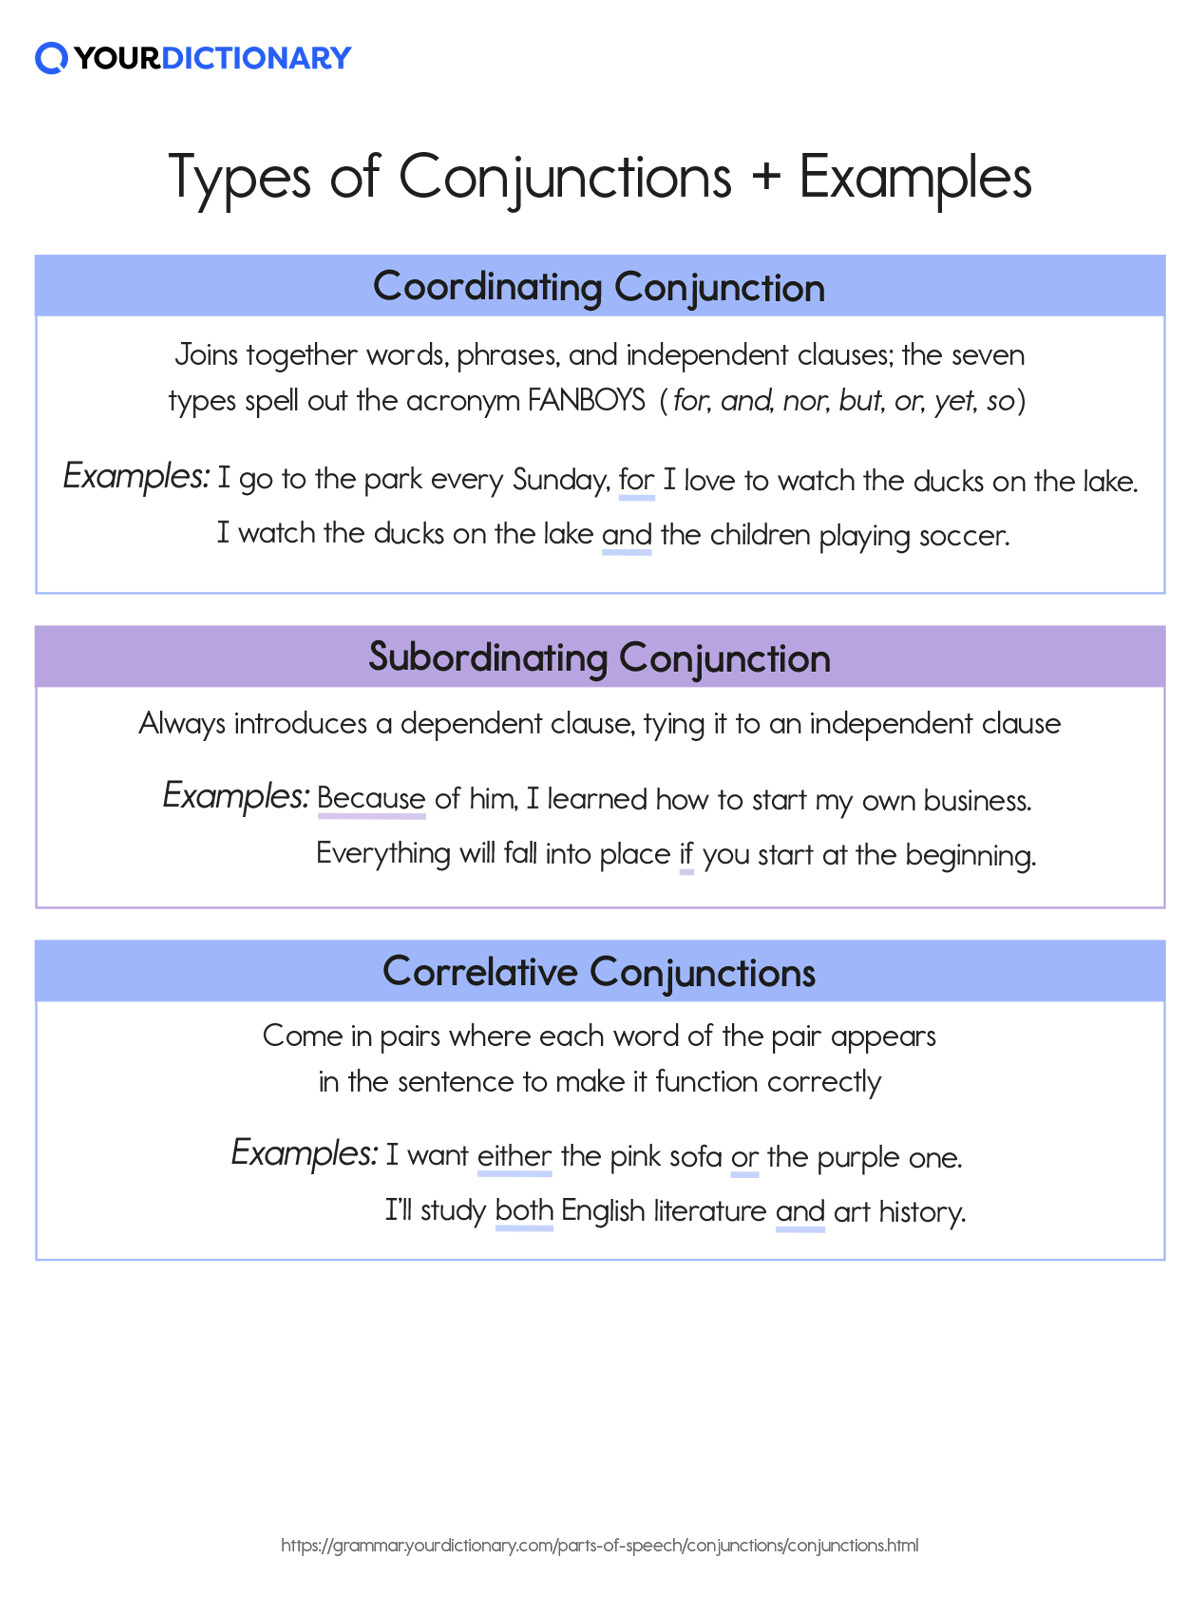 Types of Conjunctions Definition and Examples